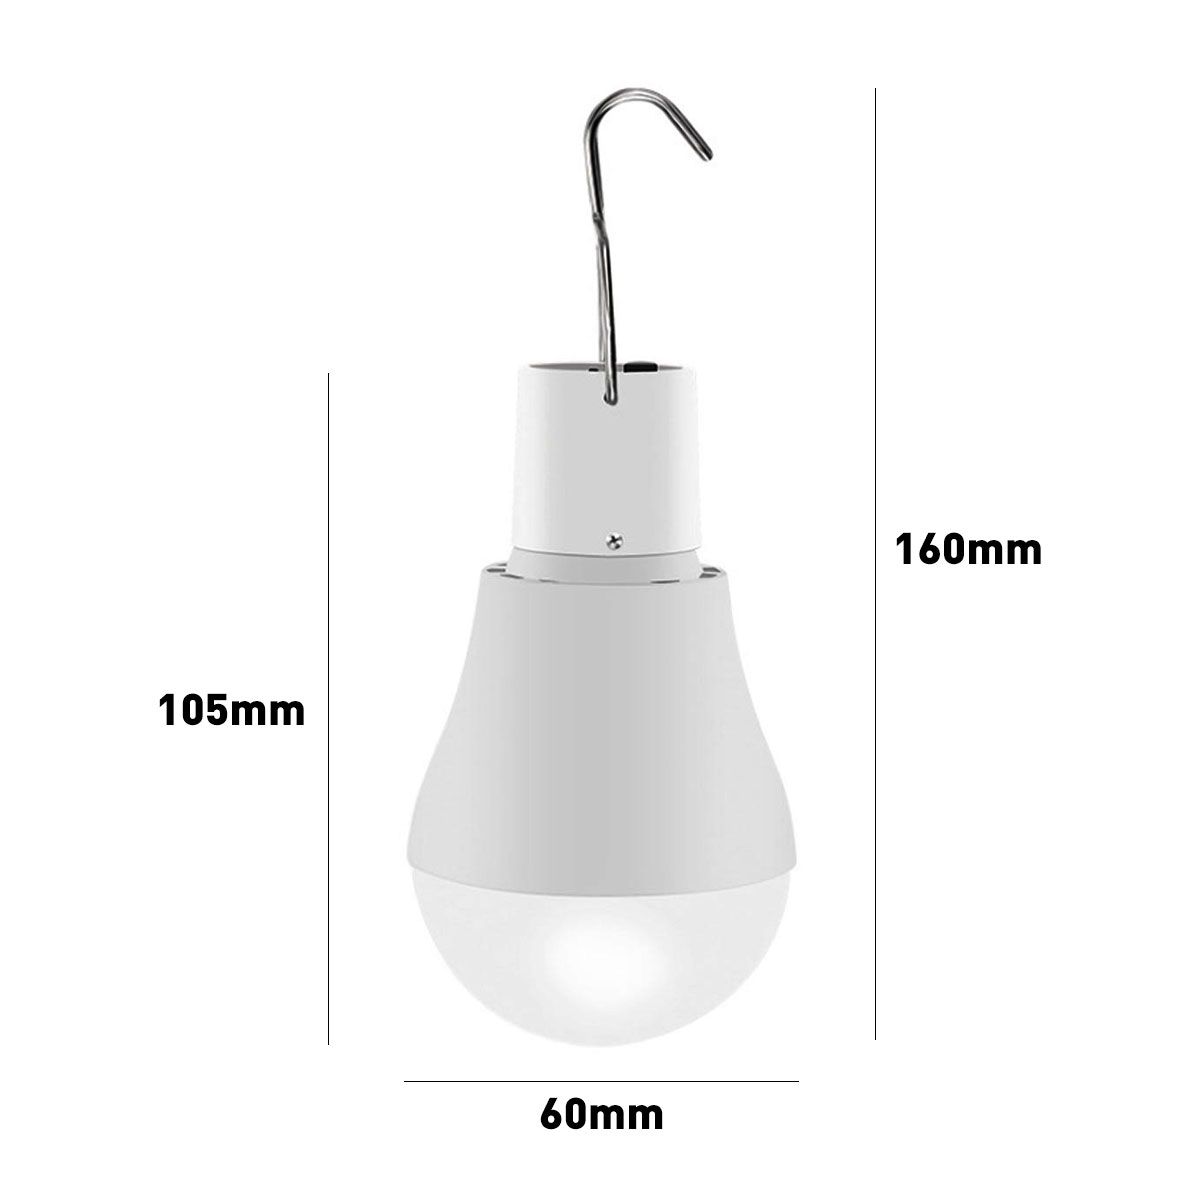 USB-Portable-Solar-Powered-LED-Light-Bulb-Outdoor-Camping-Yard-Lamp-With-Hook-DC5V-1721796